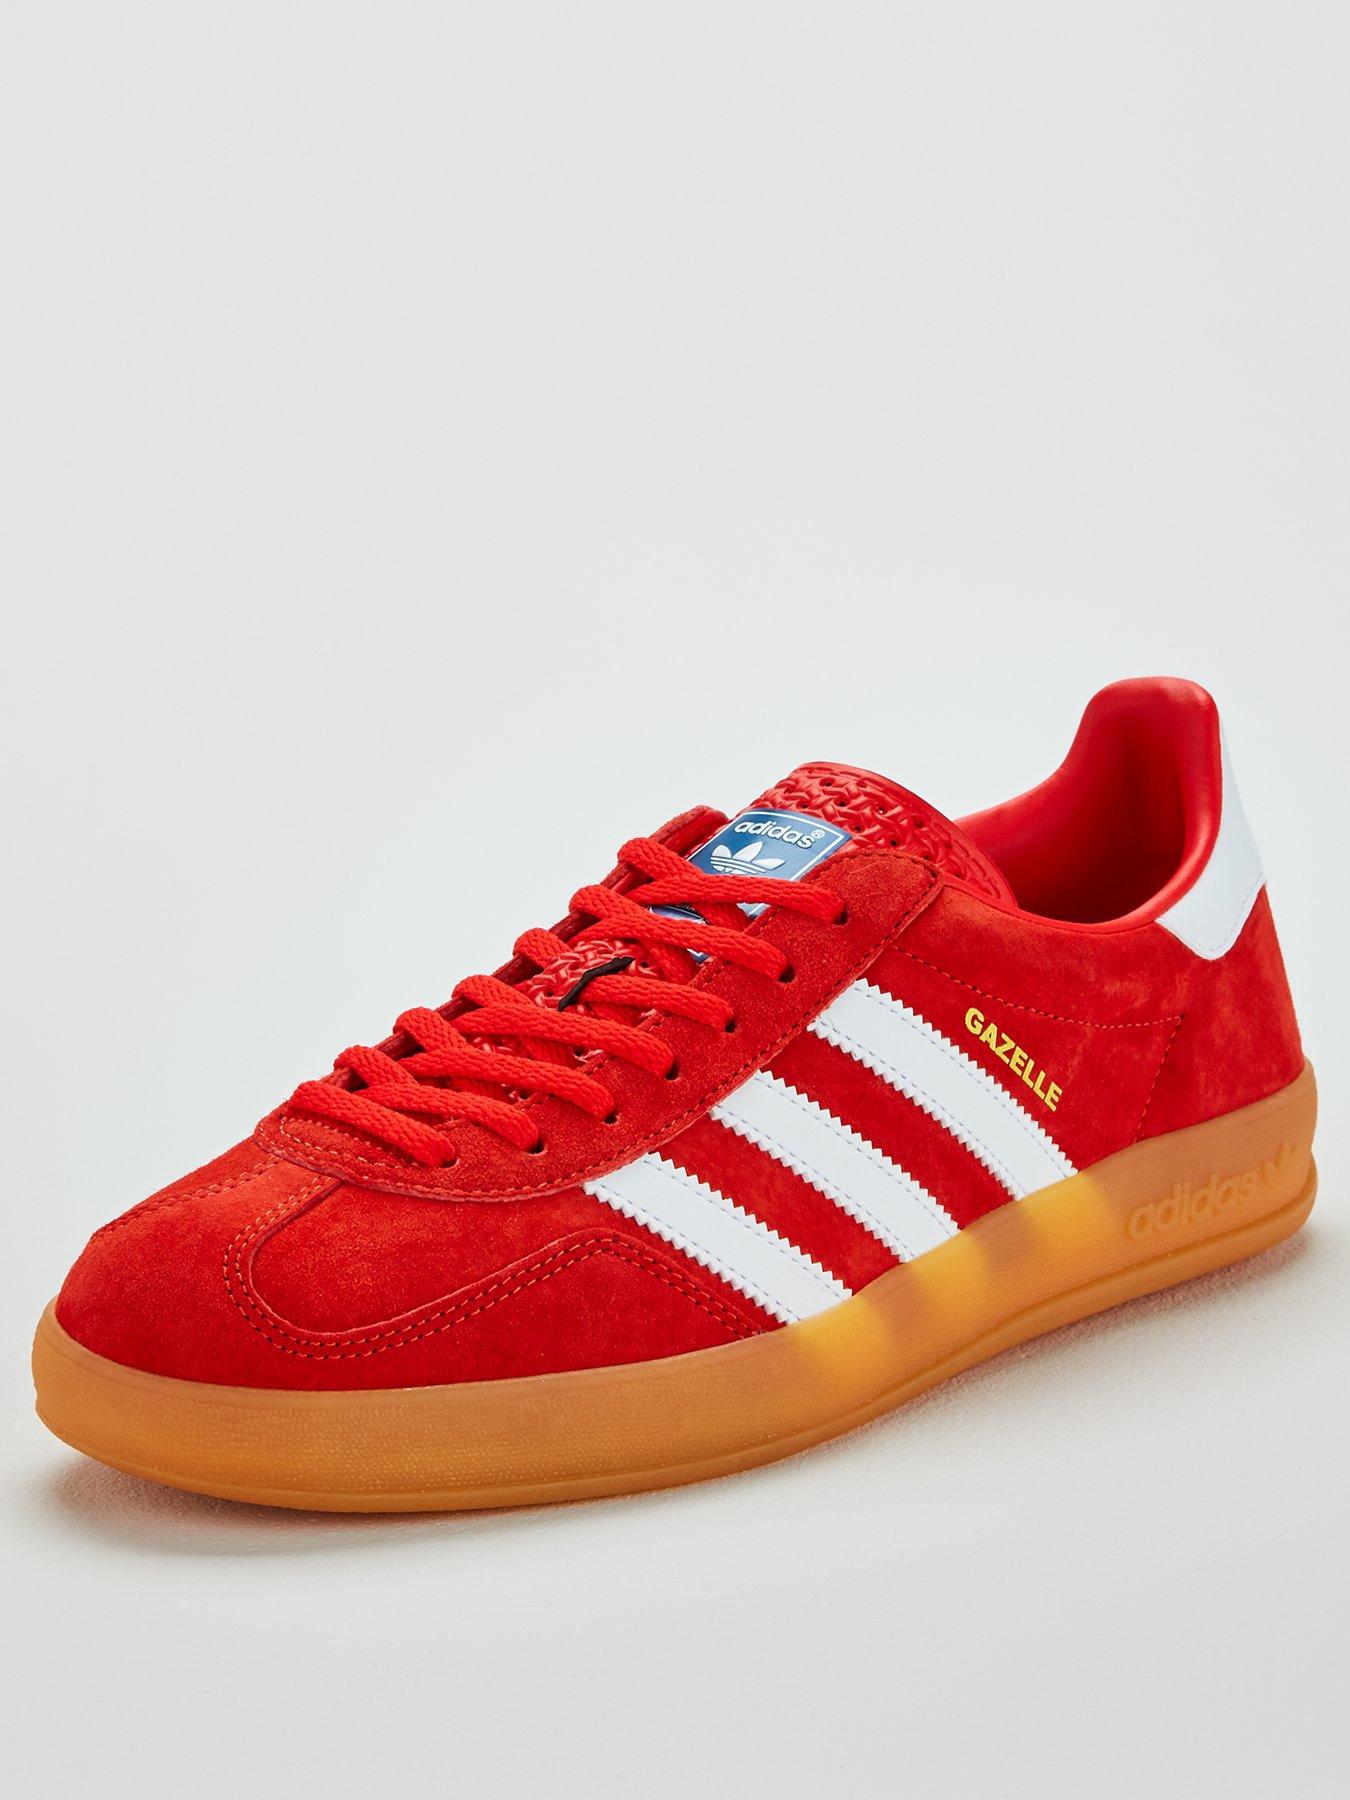 red and white adidas gazelle